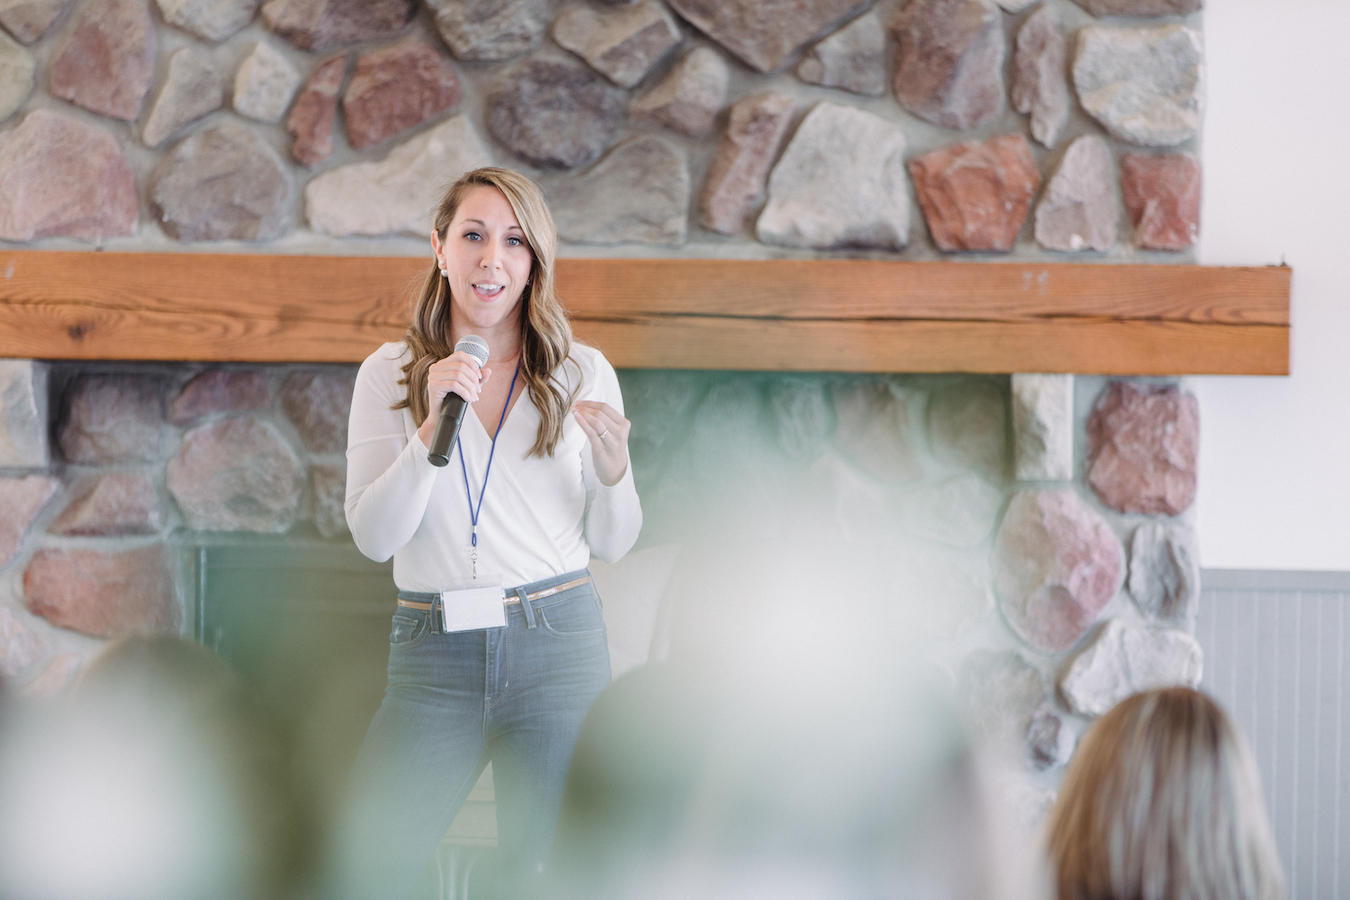 Brooke DePauw on stage speaking at The Haven Conference in West Olive, Michigan